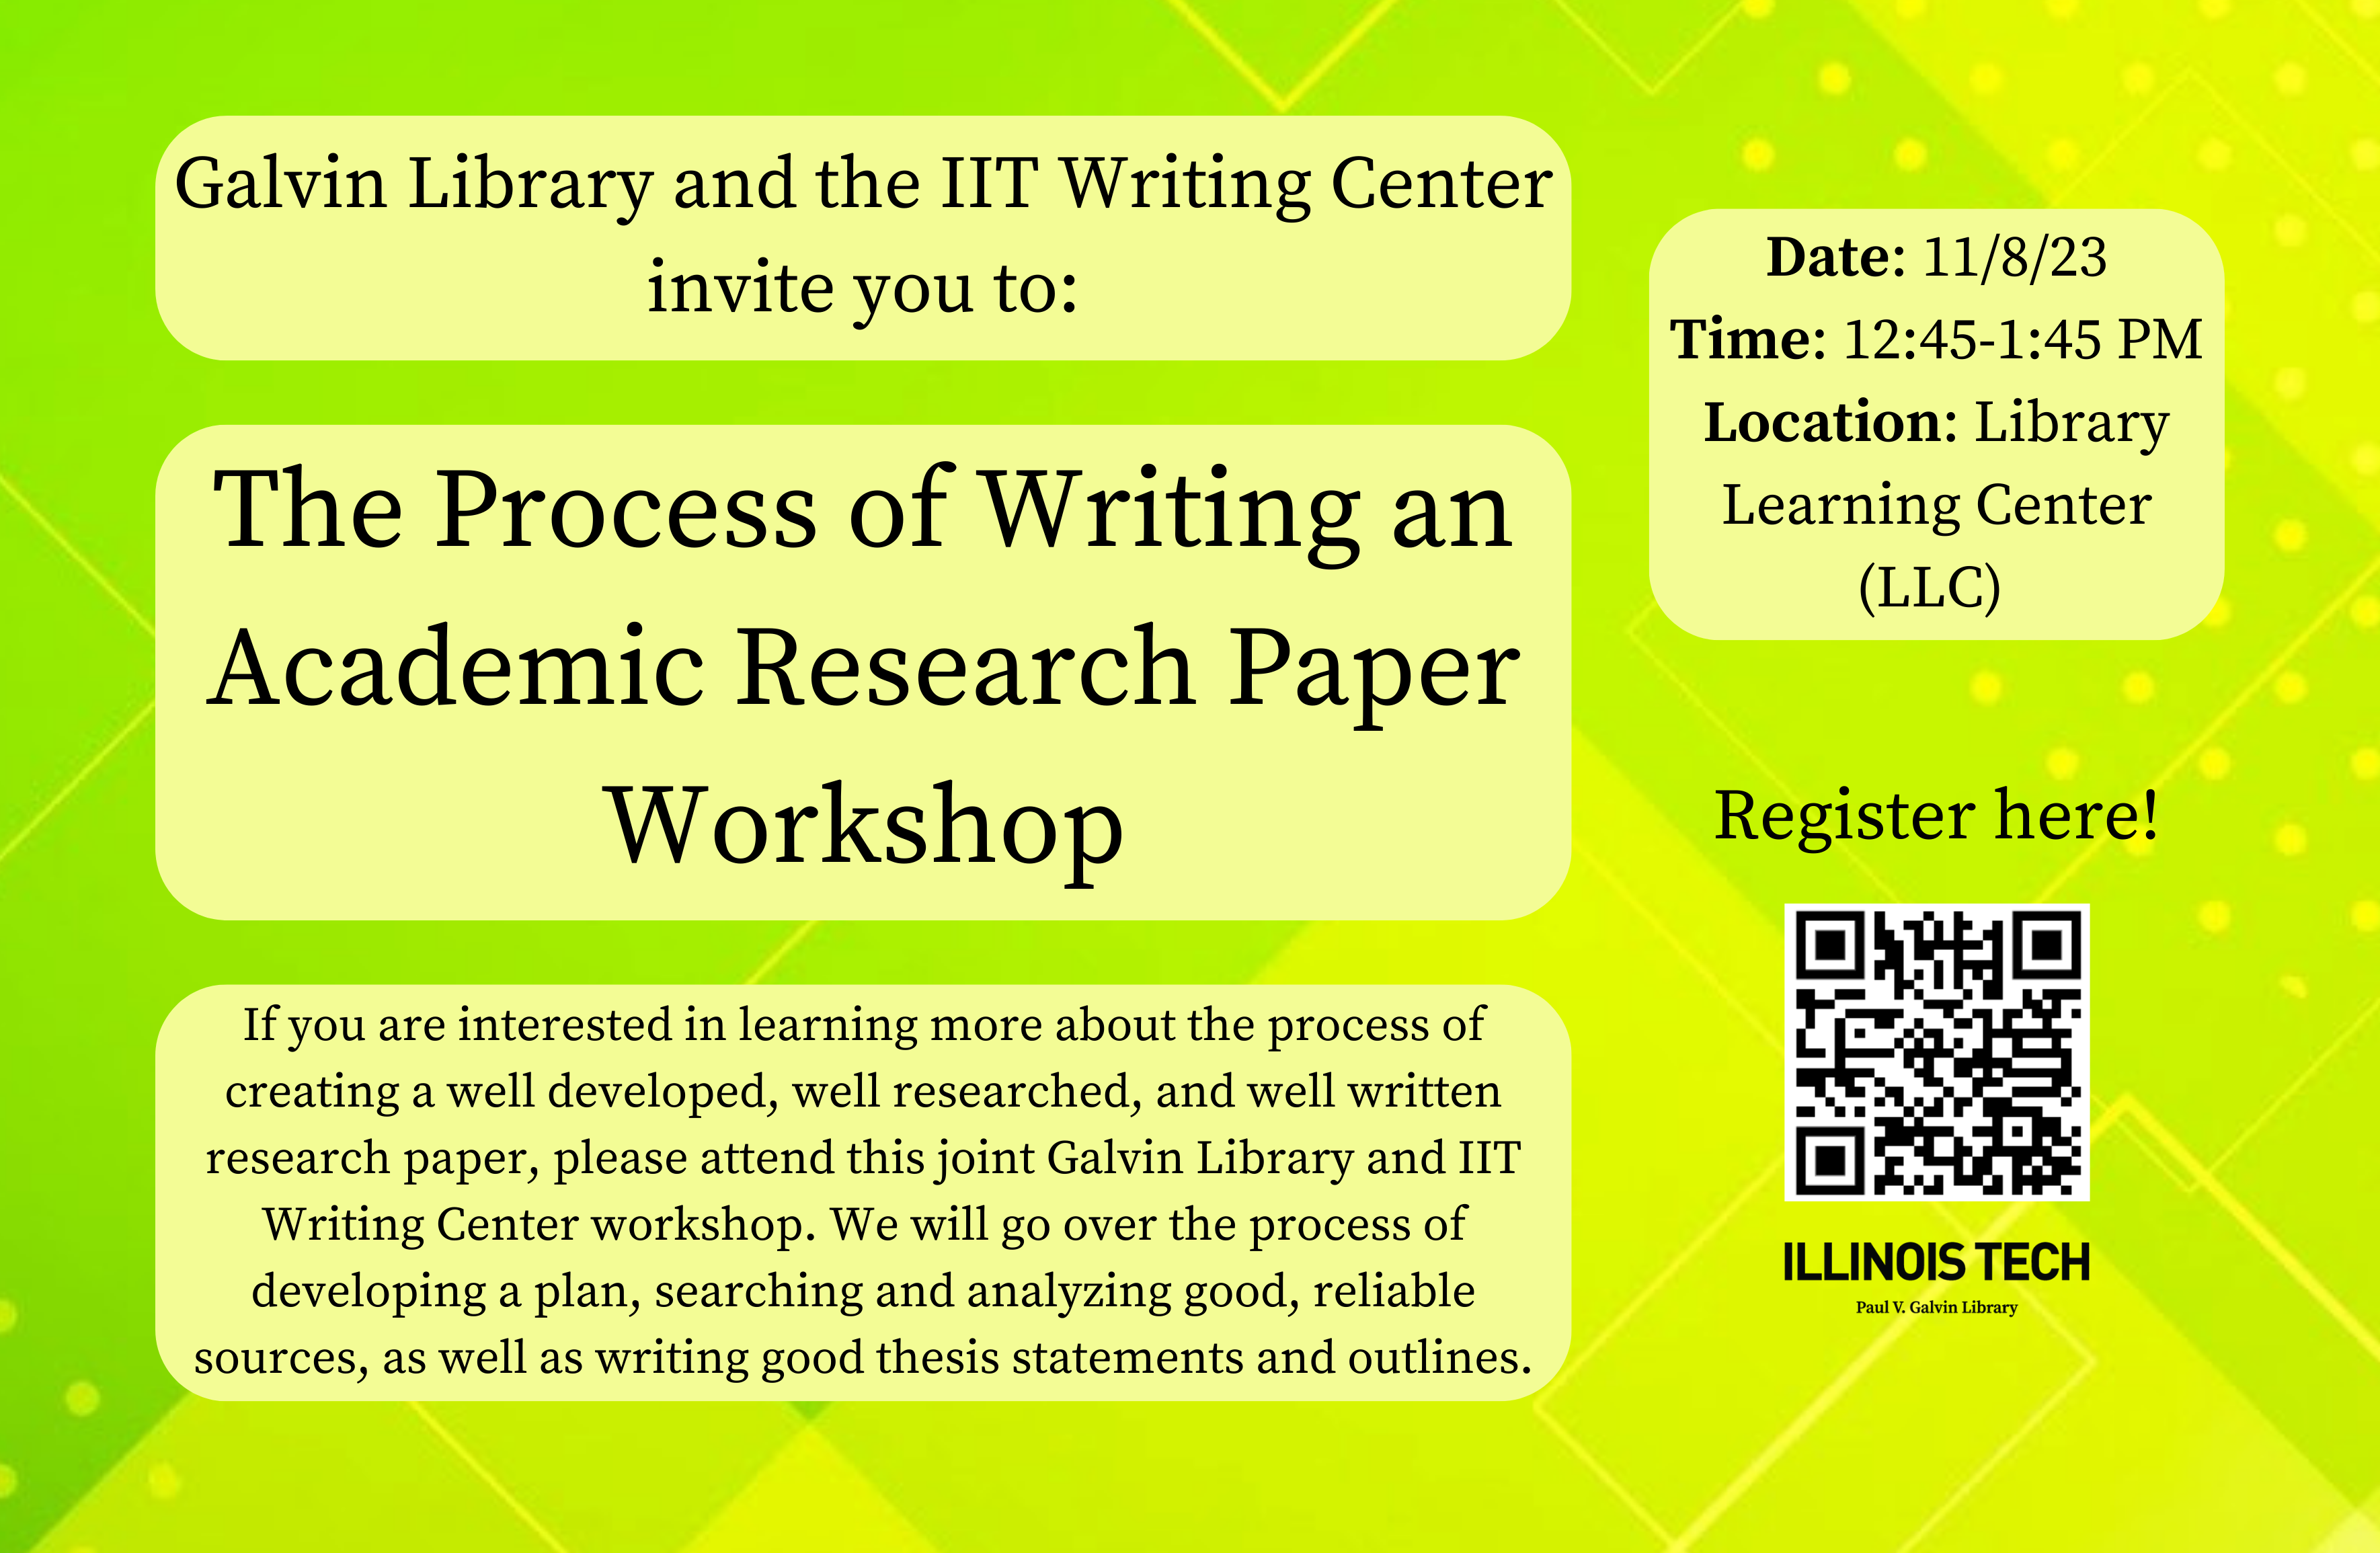 Process of Writing an Academic Research Paper